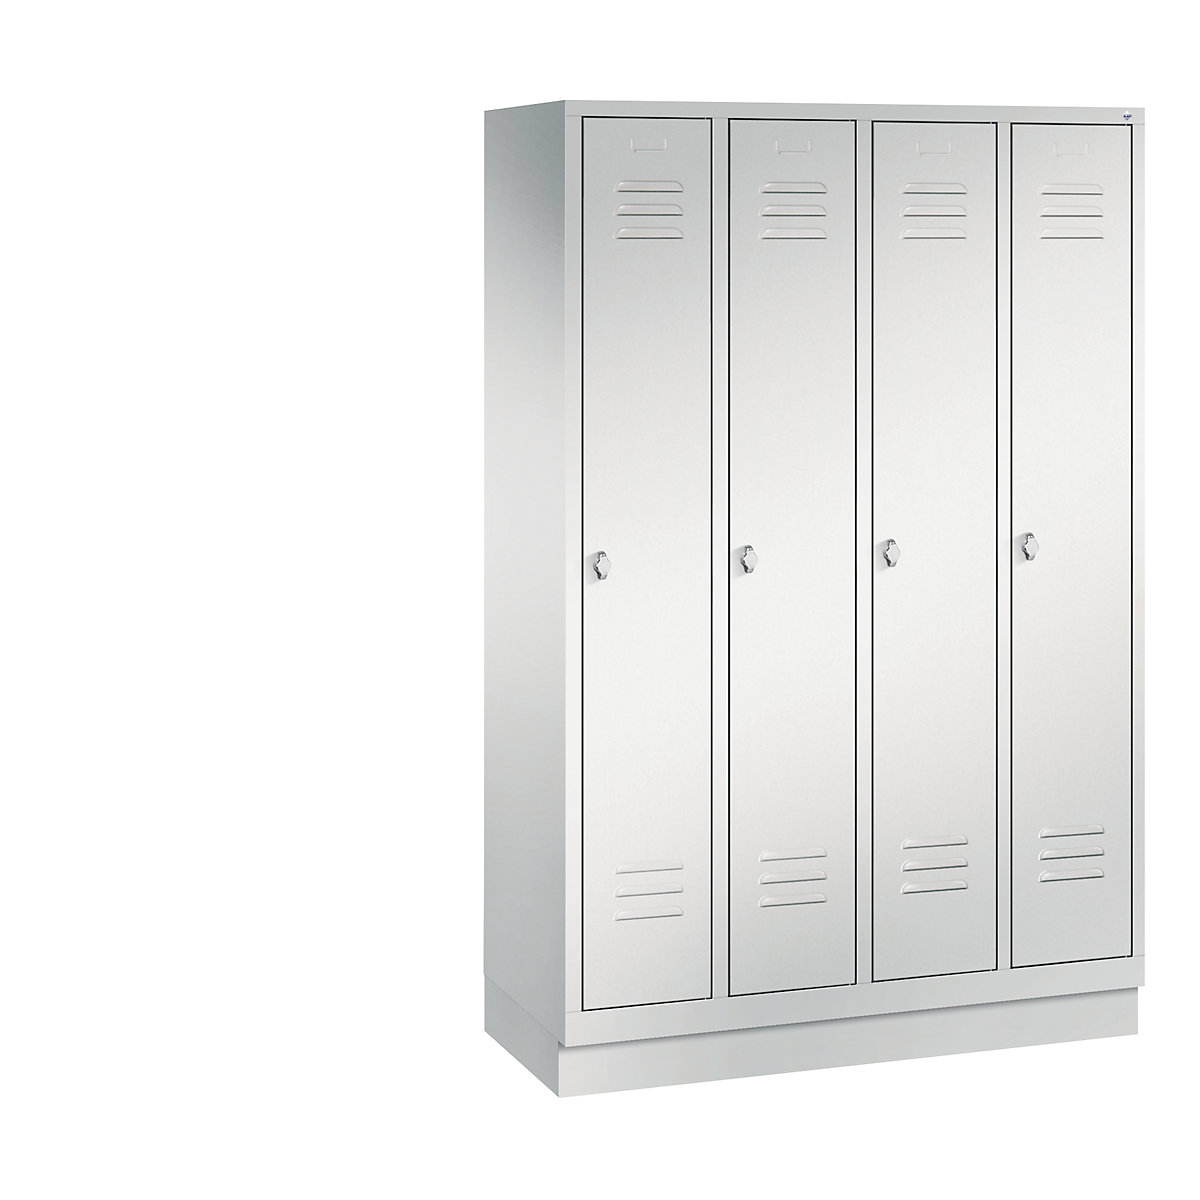 CLASSIC cloakroom locker with plinth – C+P, 4 compartments, compartment width 300 mm, light grey-8